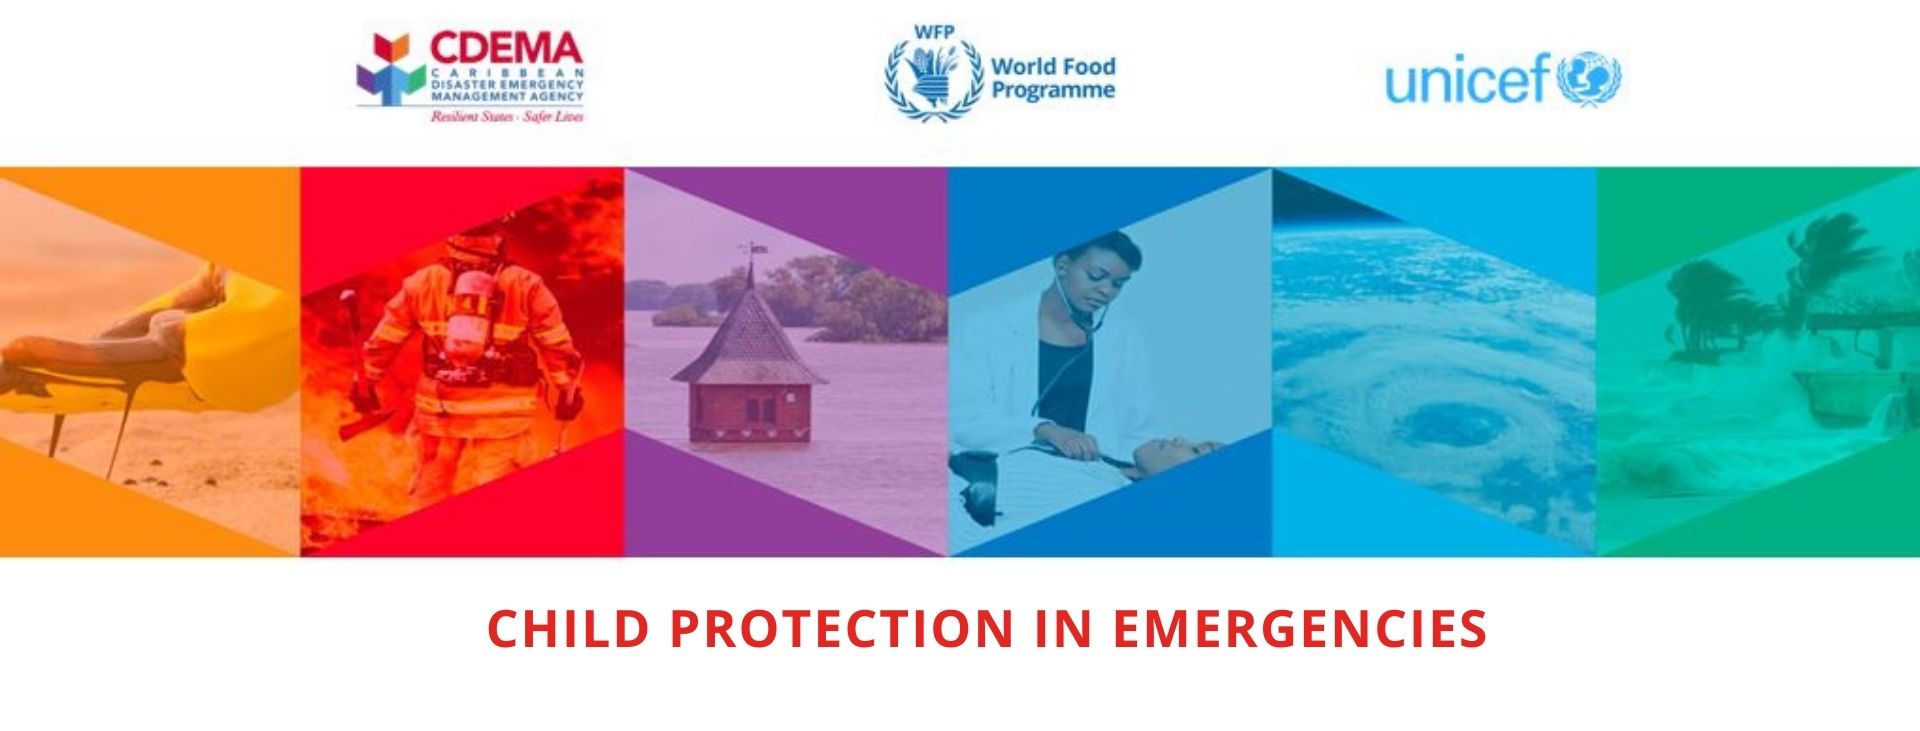 Child Protection in Emergencies